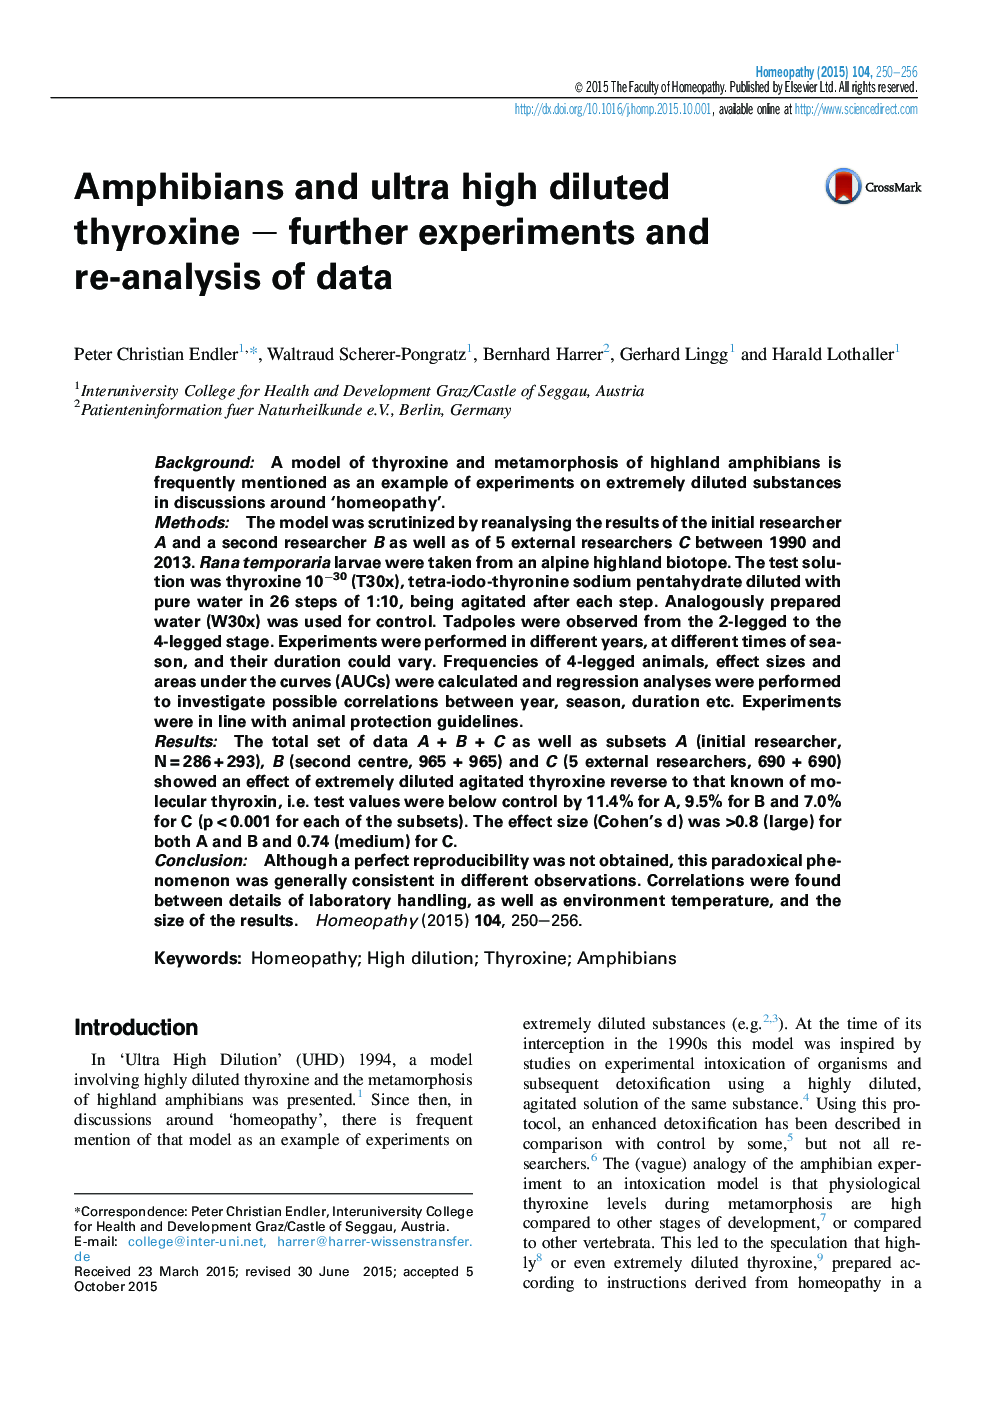 Amphibians and ultra high diluted thyroxine - further experiments and re-analysis of data